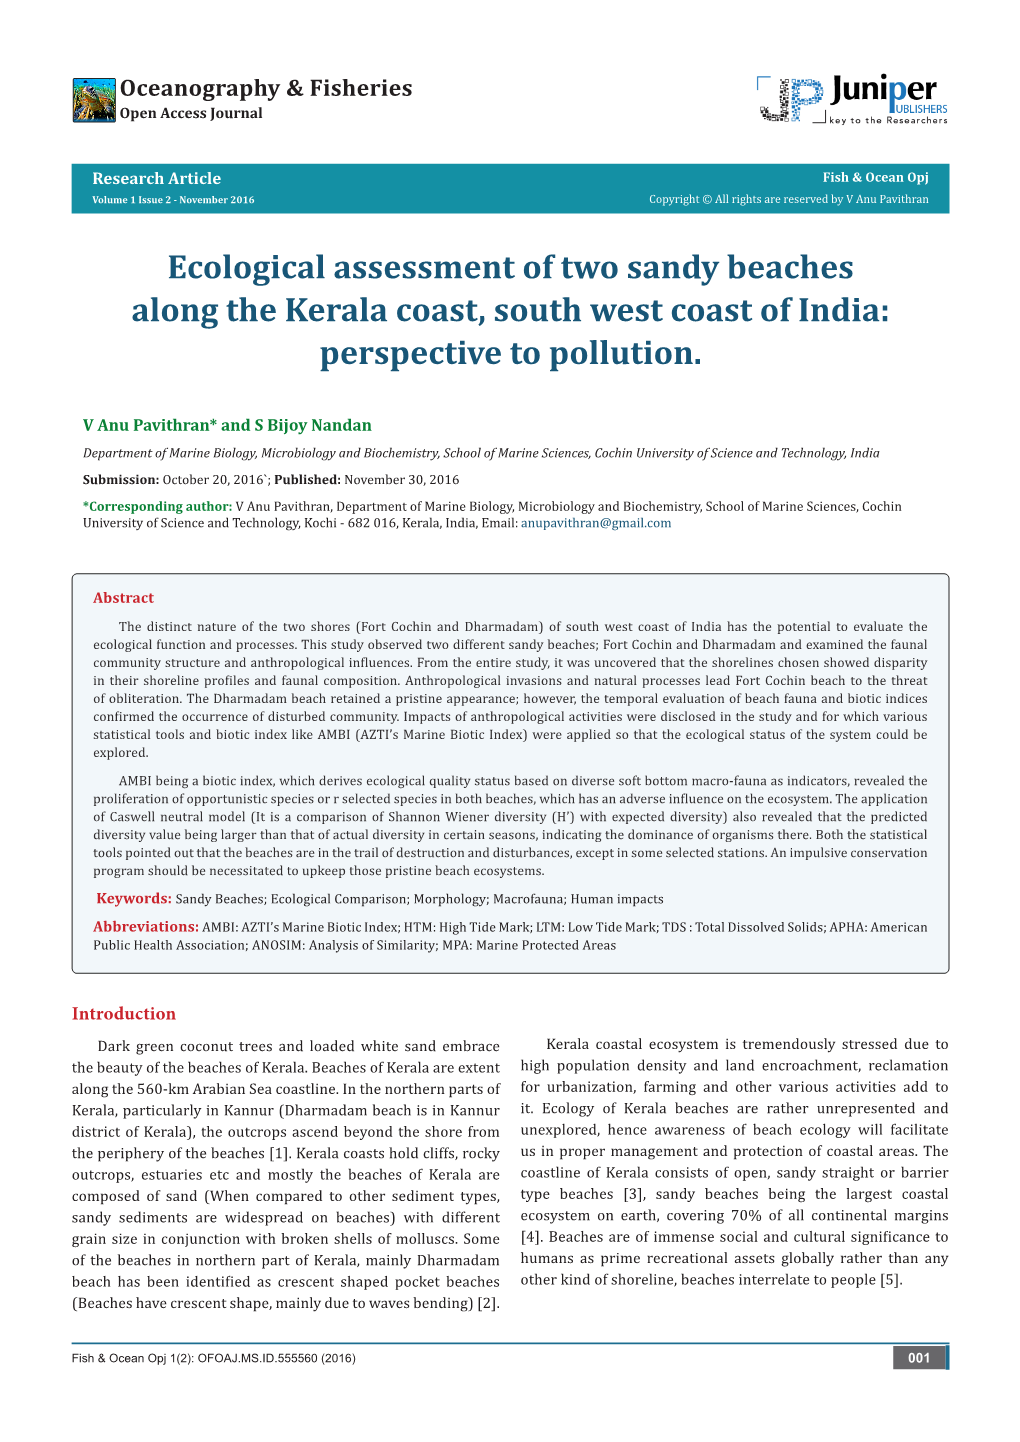 Ecological Assessment of Two Sandy Beaches Along the Kerala Coast, South West Coast of India: Perspective to Pollution